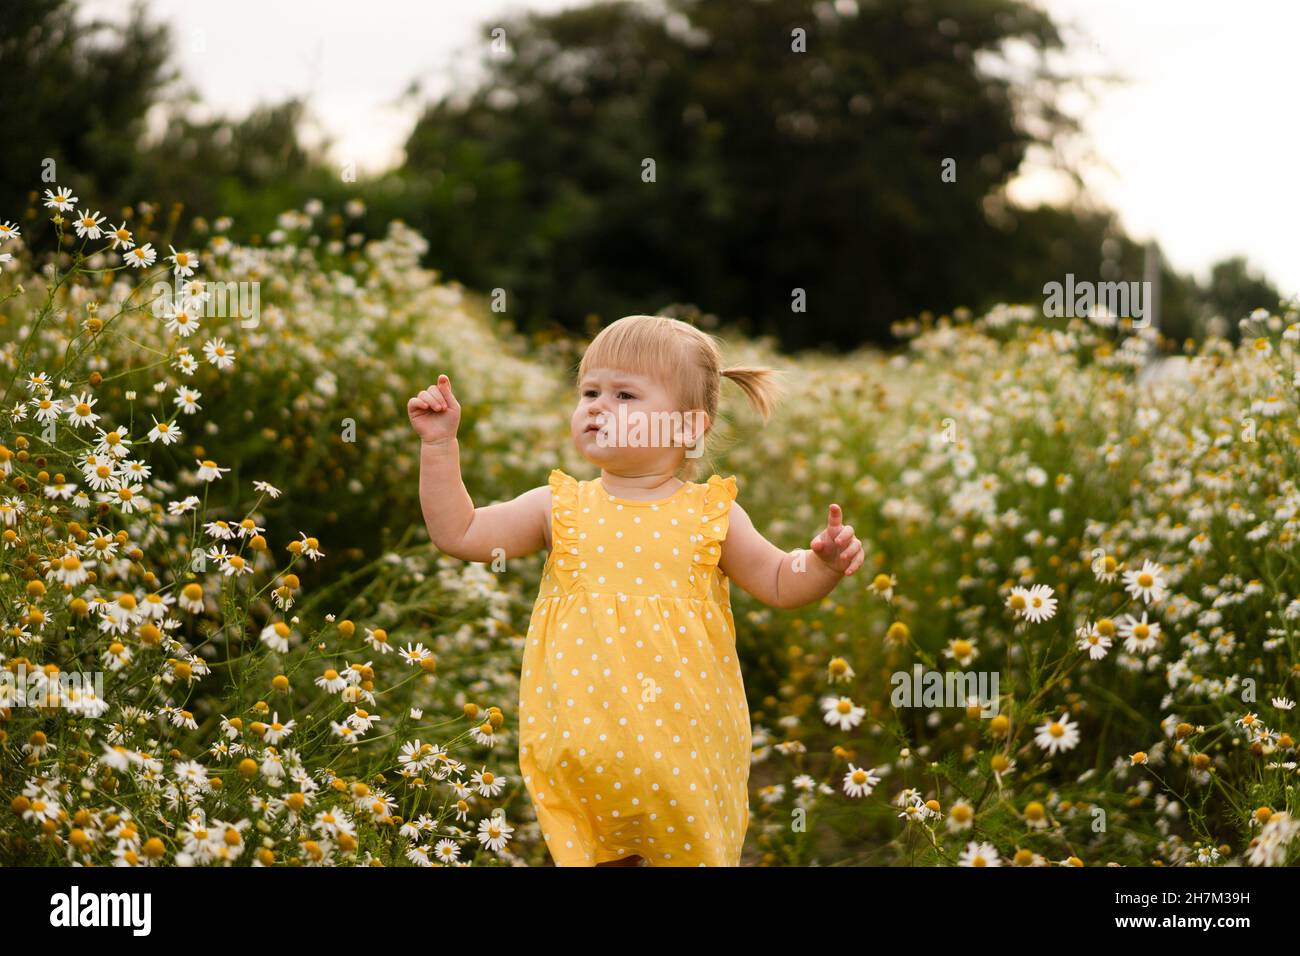 Cute toddler girl in yellow dress gesturing by flowers on meadow Stock Photo